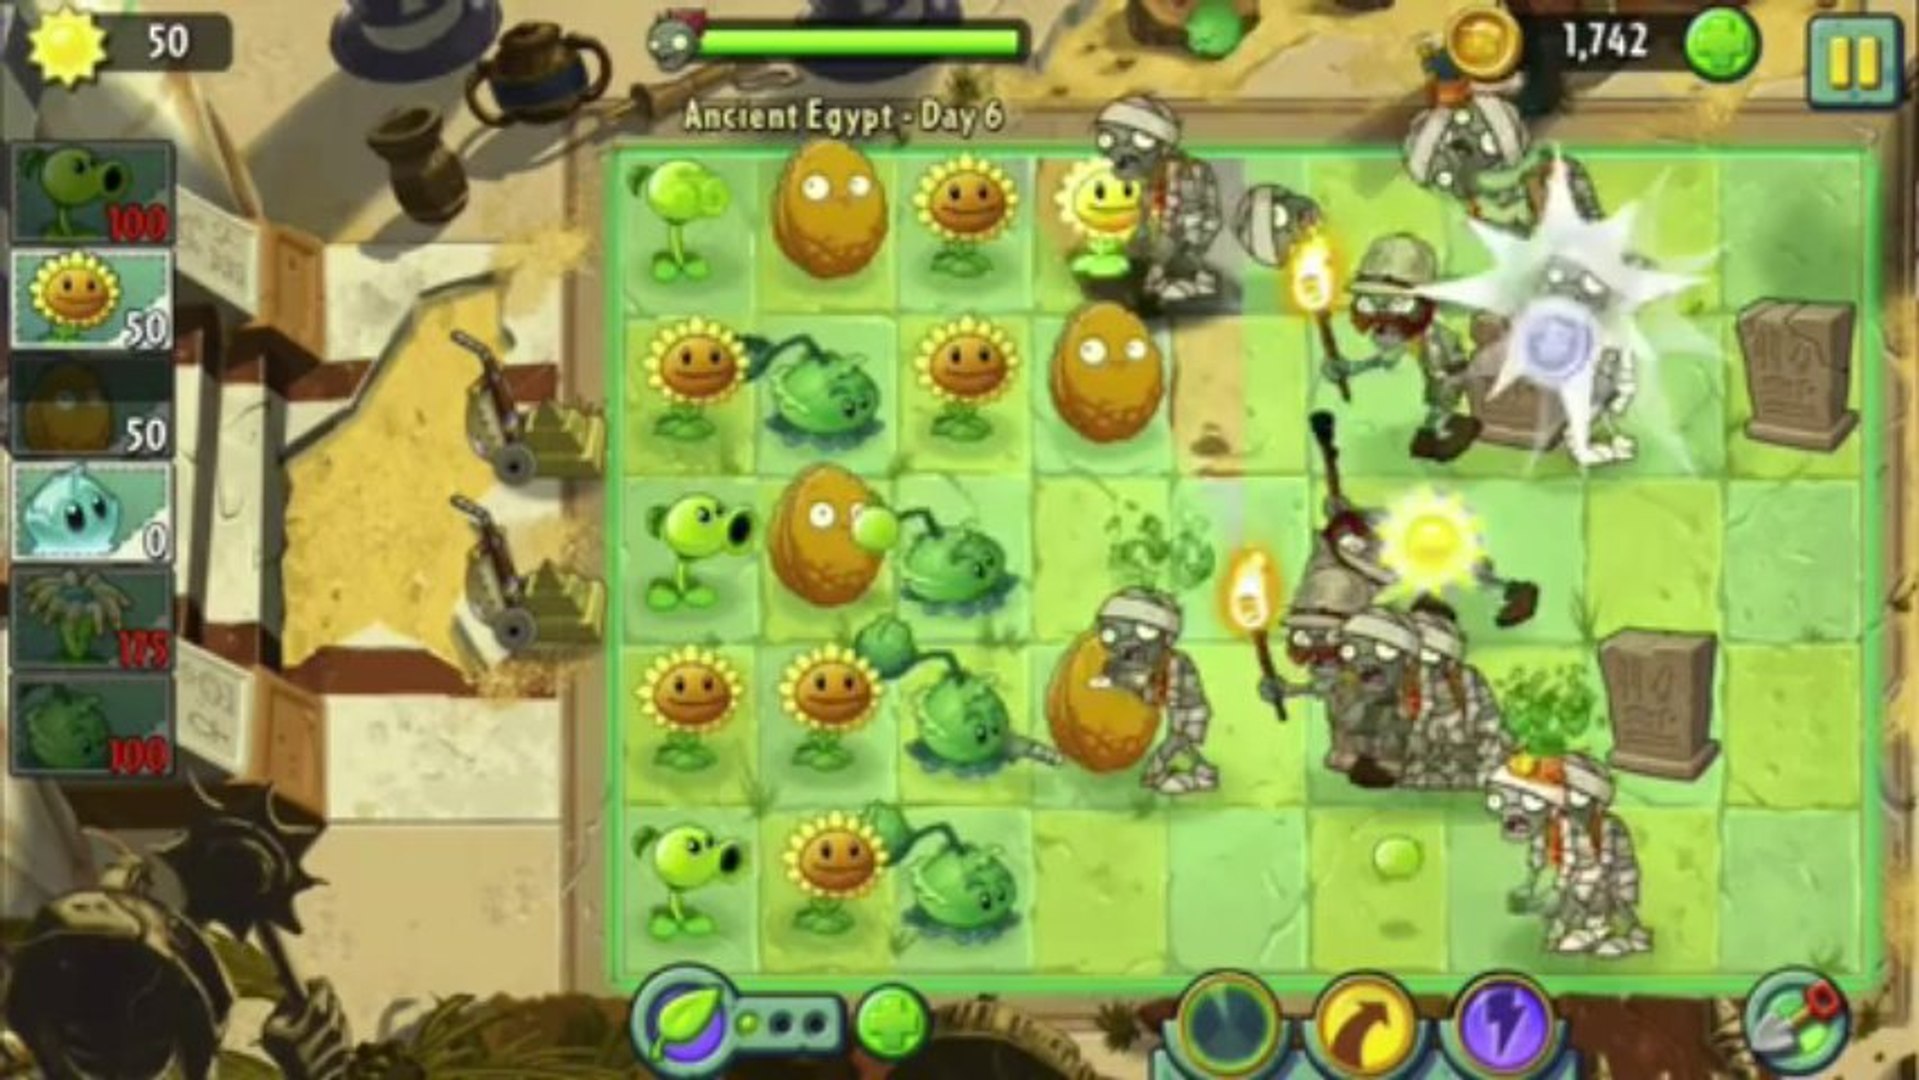 Plants vs. Zombies 2: It's About Time - Gameplay Walkthrough Part